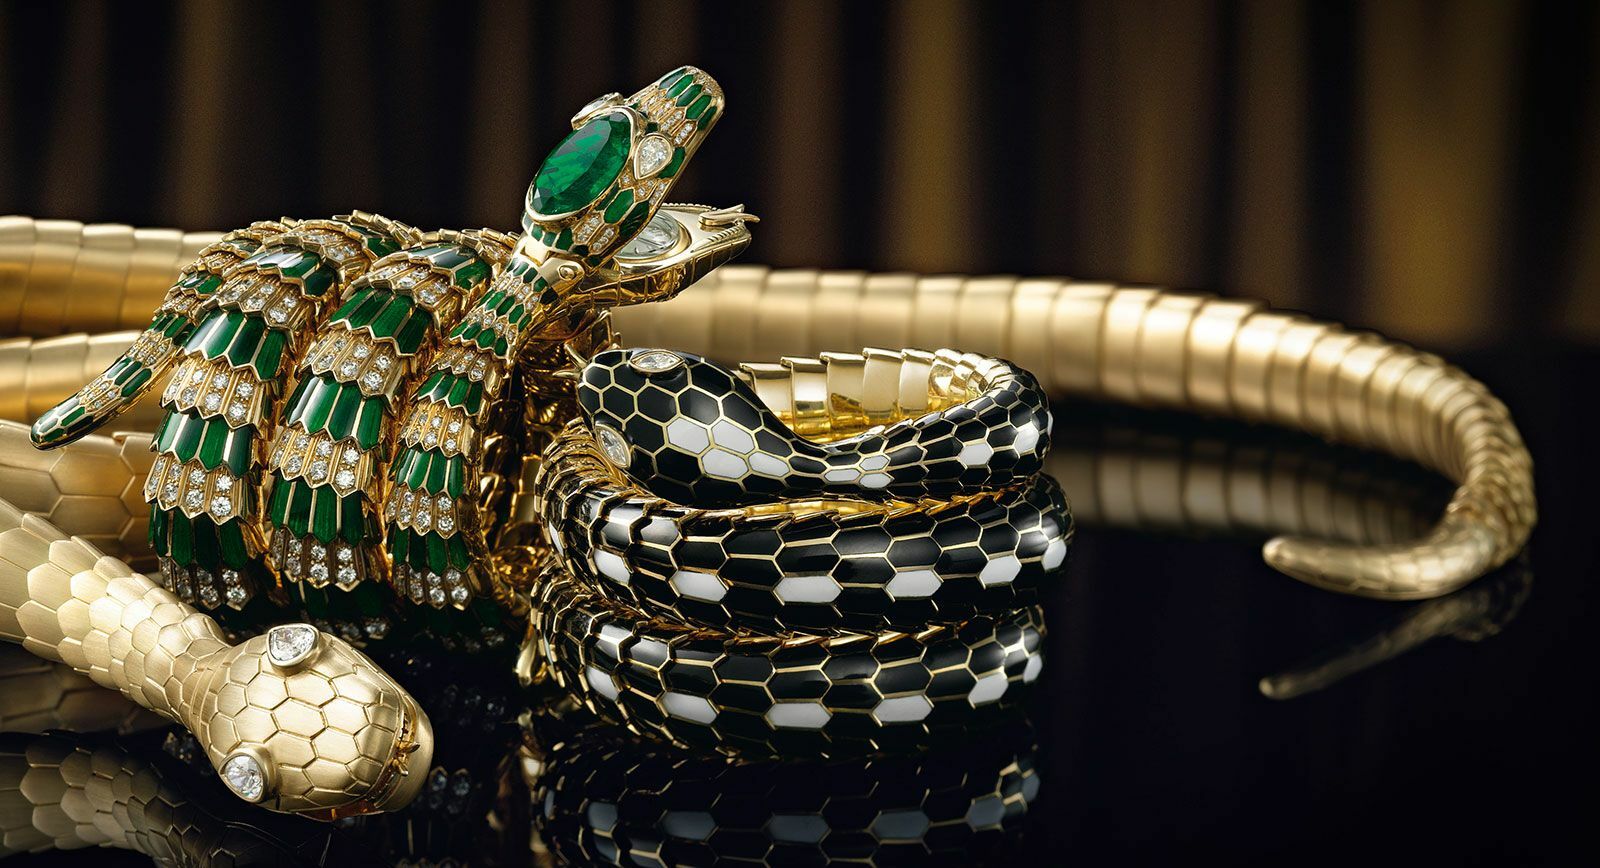 Bvlgari Serpenti Form Exhibition: Celebration of the Serpenti Snake and its Legacy